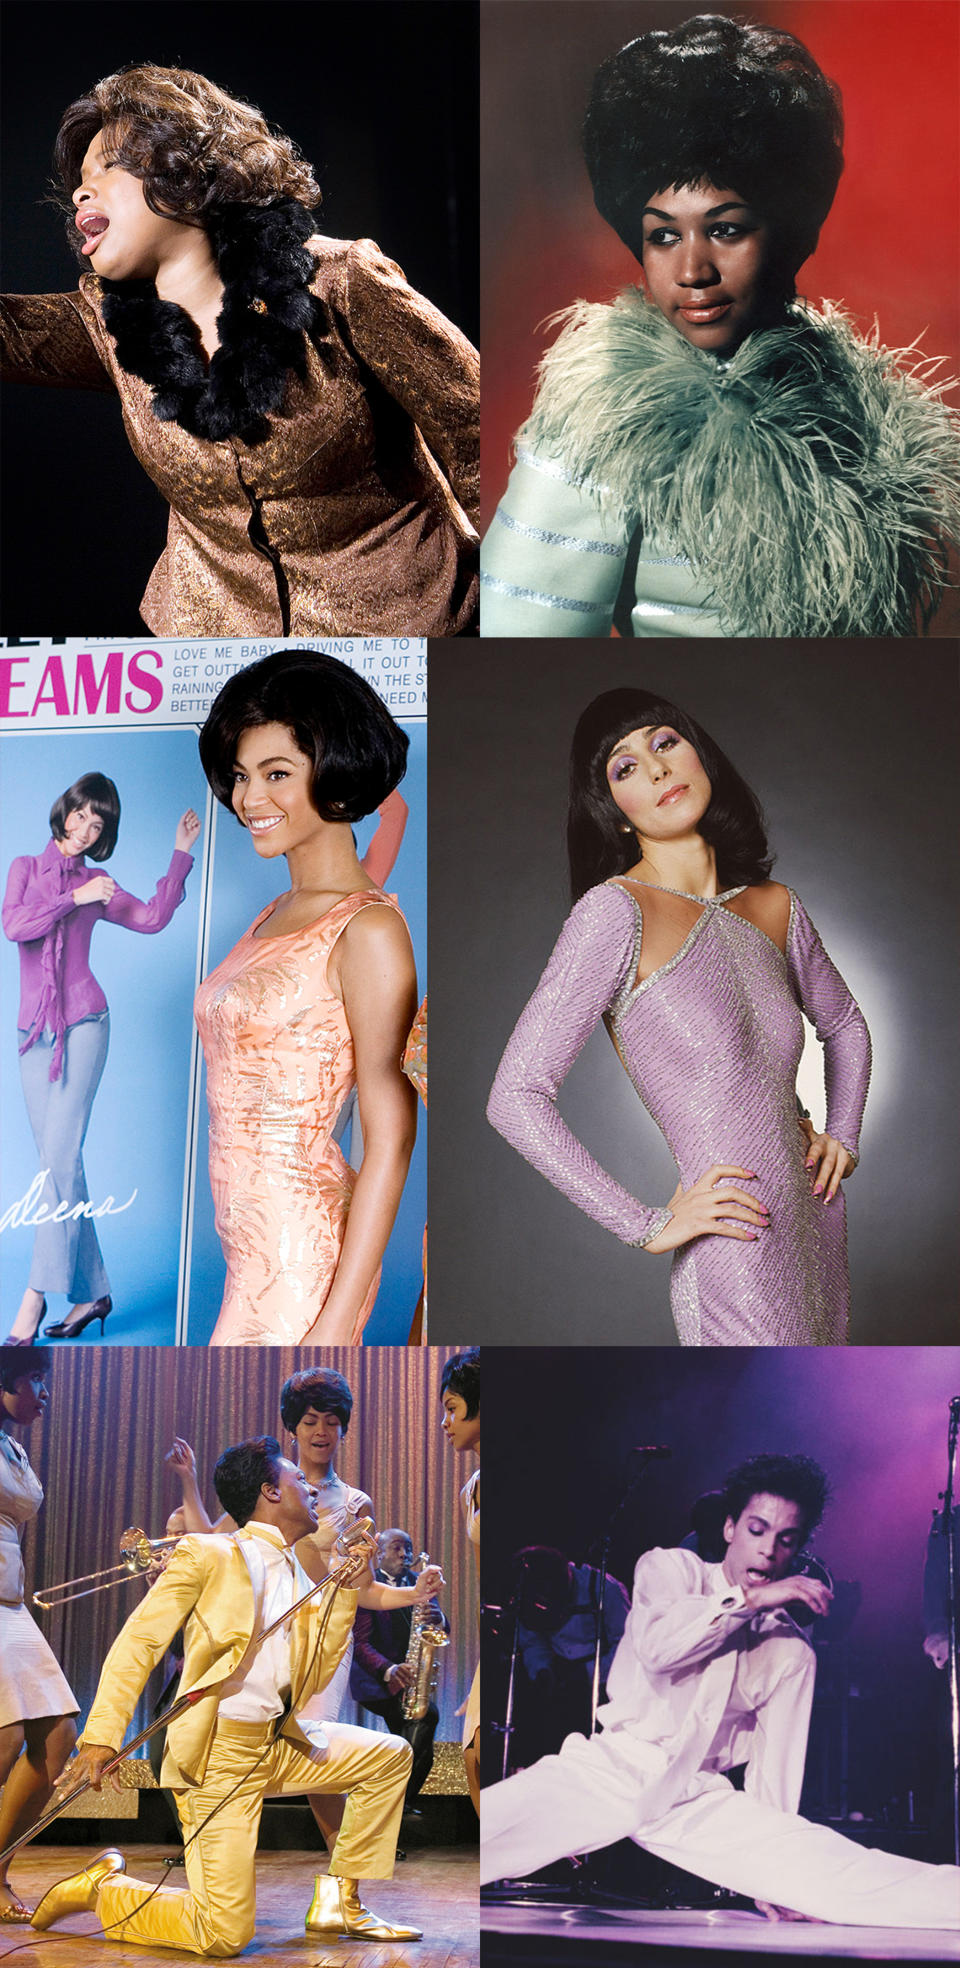 both Jennifer Hudson and Aretha Franklin wear fluffy collars, Beyoncé and Cher have slinky dresses, and Eddie Murphy and Prince have snazzy suits